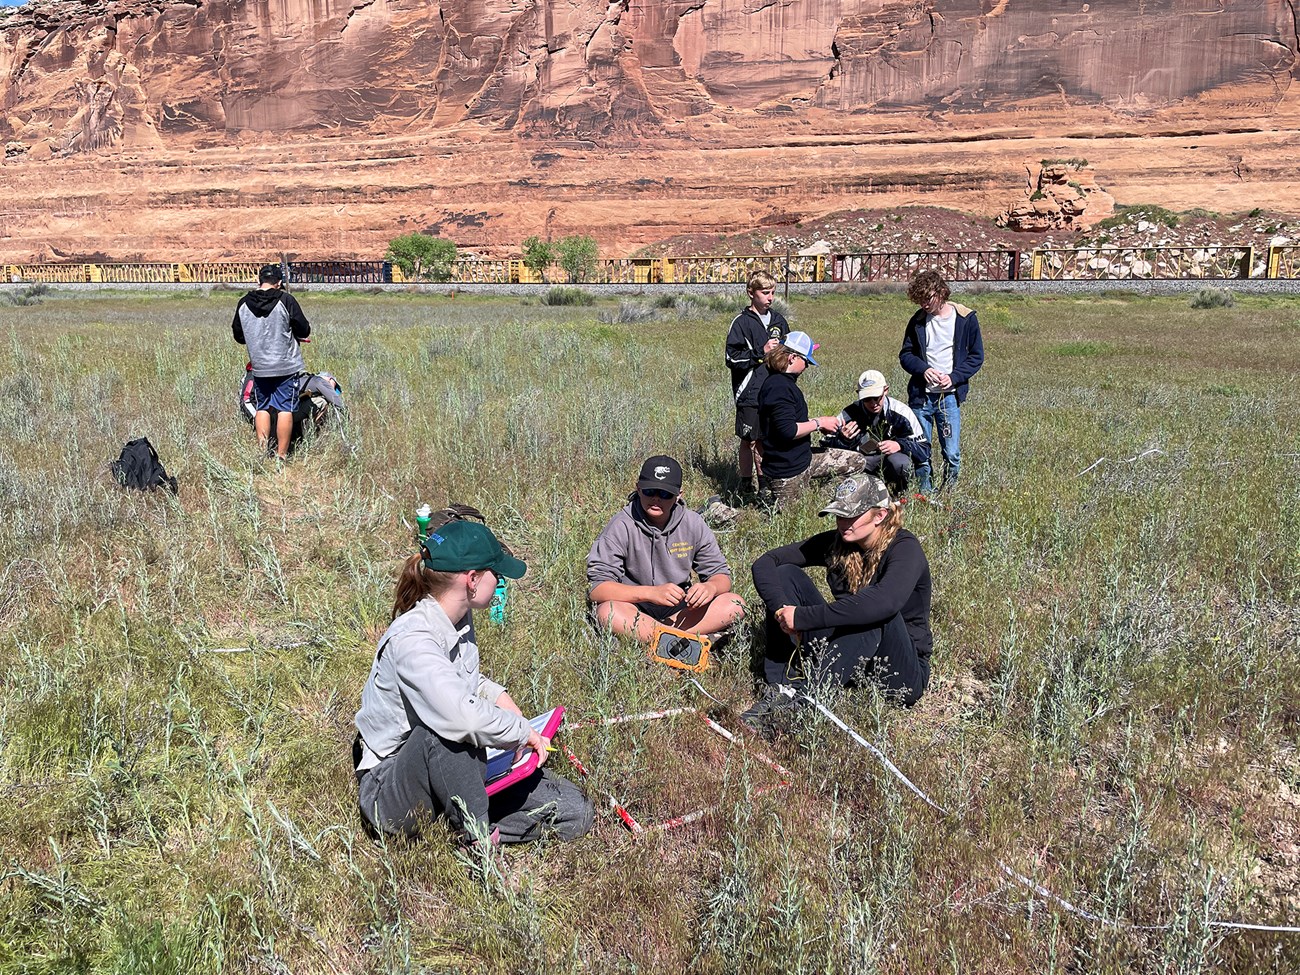 Groups of students sitting or standing in green vegetation against a backdrop of red-rock canyon walls.